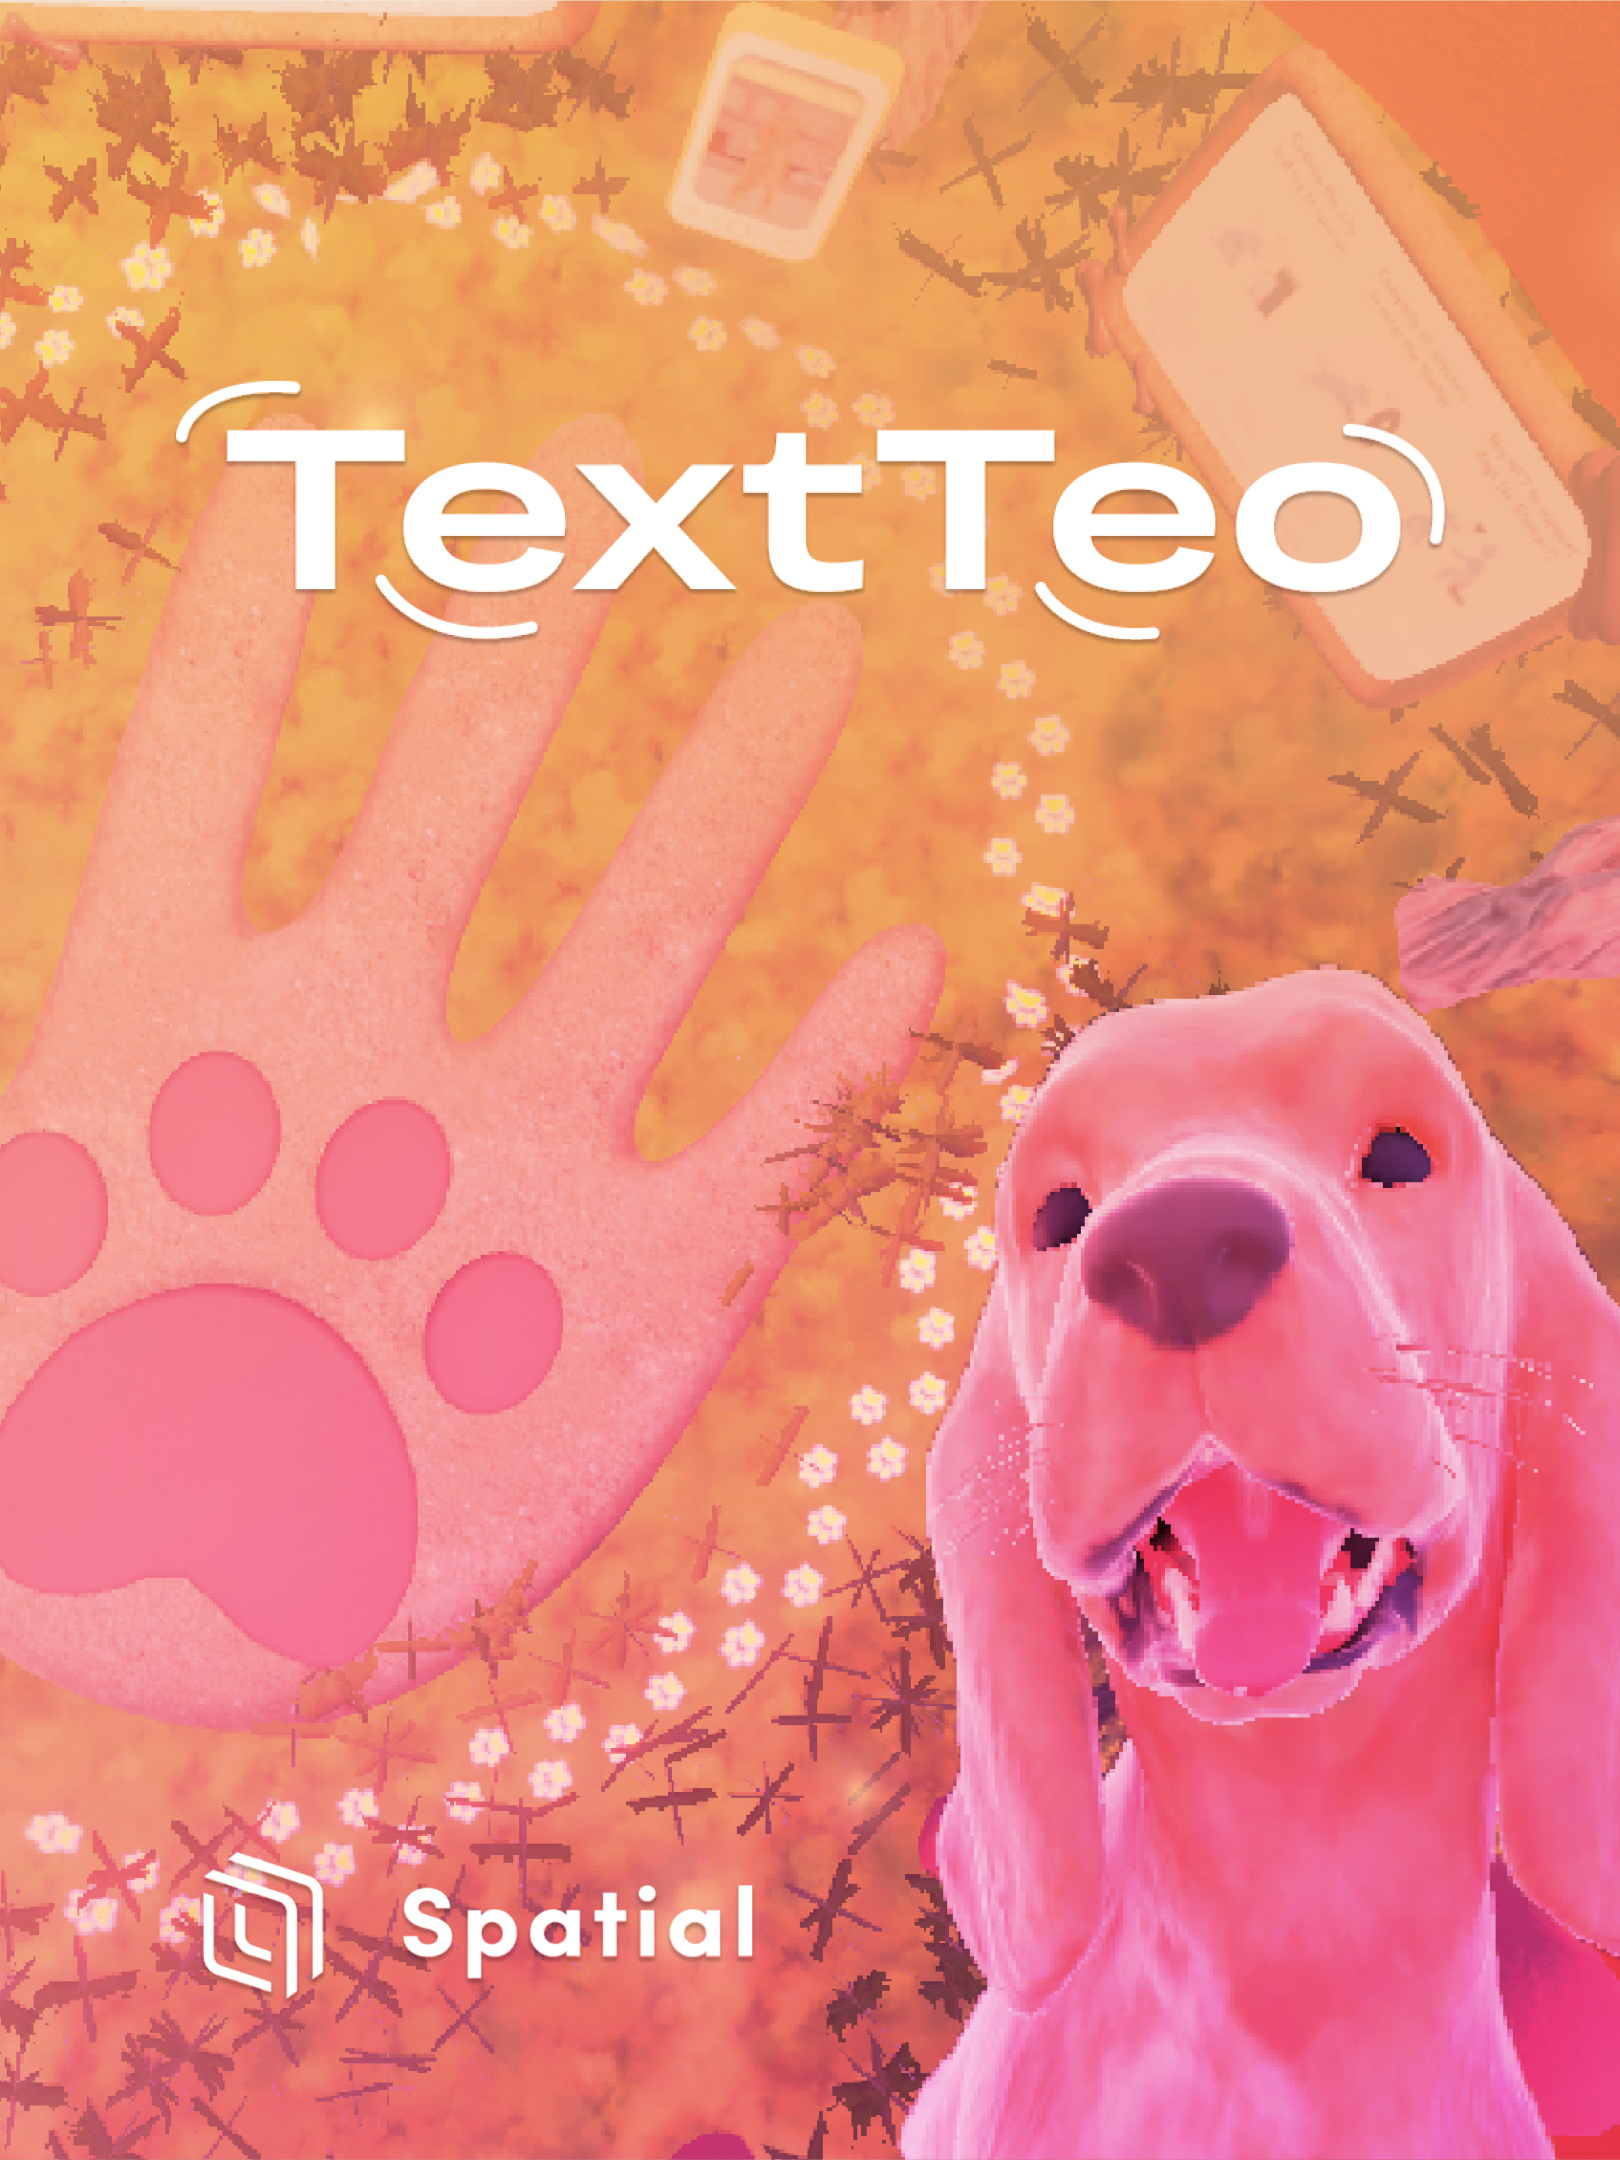 a poster containing the TextTeo logo along with an image of a virtual dog and the Spatial logo